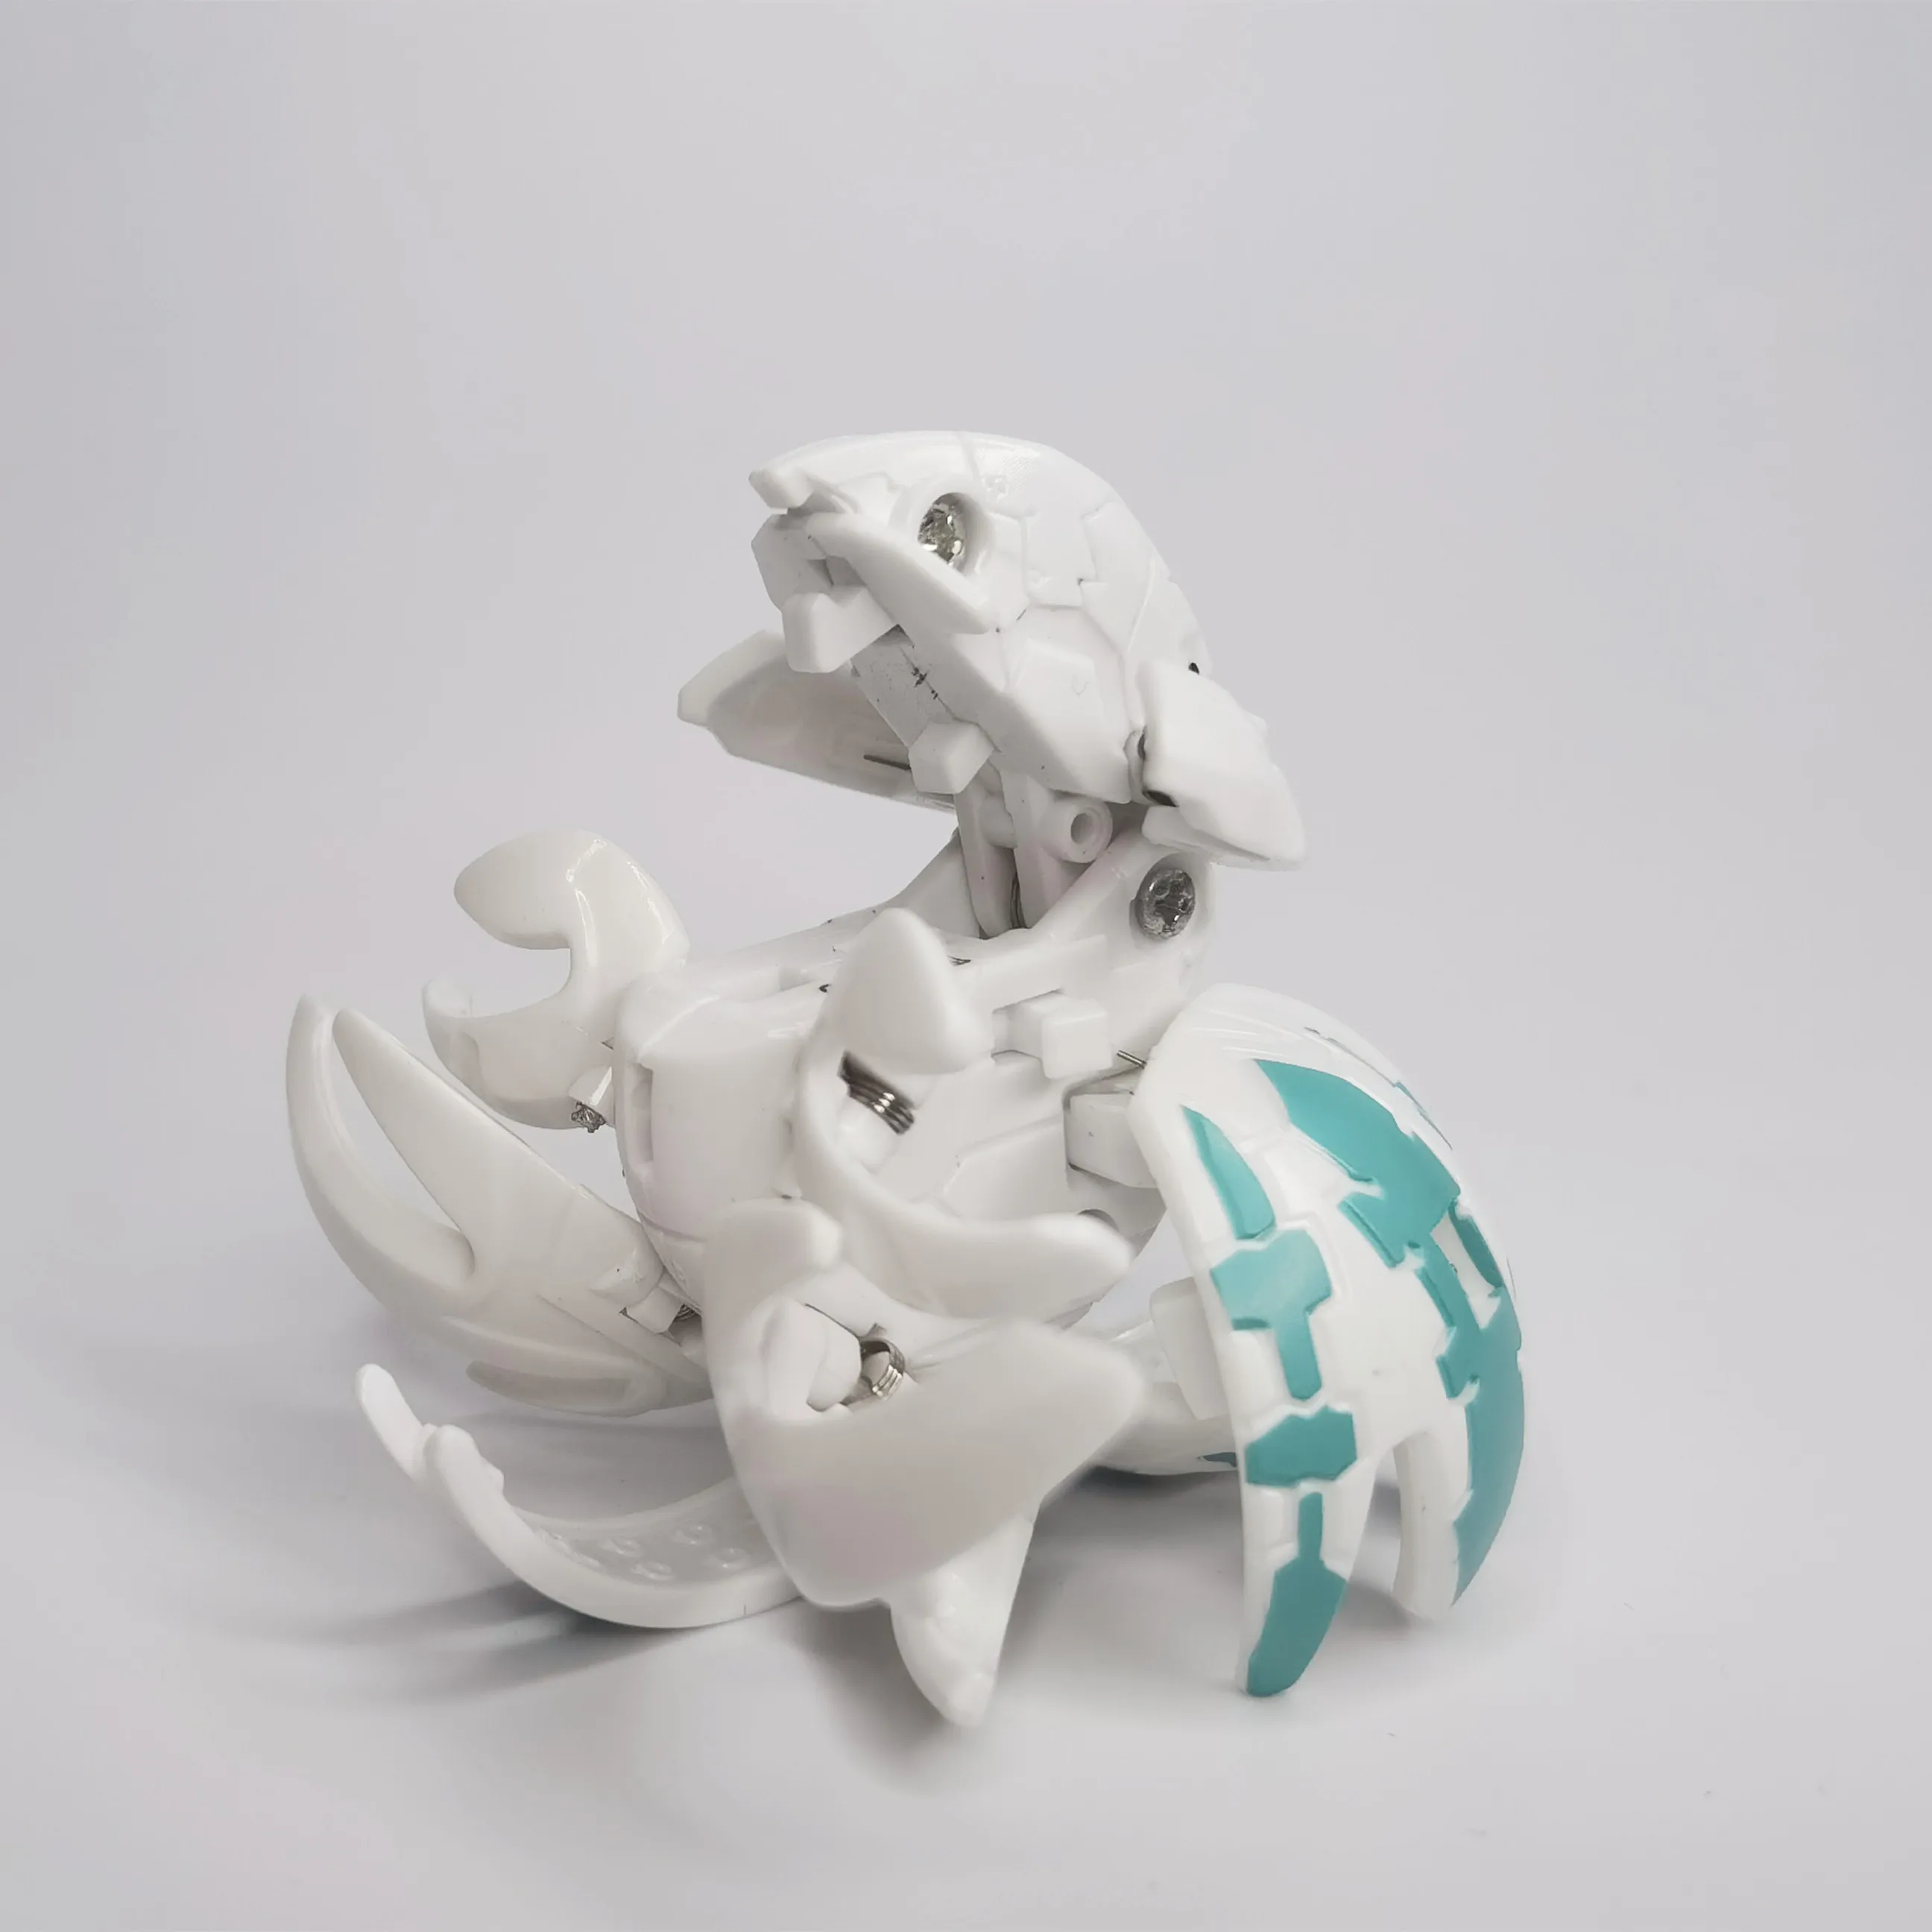 Bakuganes,Unique 5 8 12 Children's Suitable For Children Toy Burst Collectible Action Figures Fusion met Mo	nster Ball images - 6